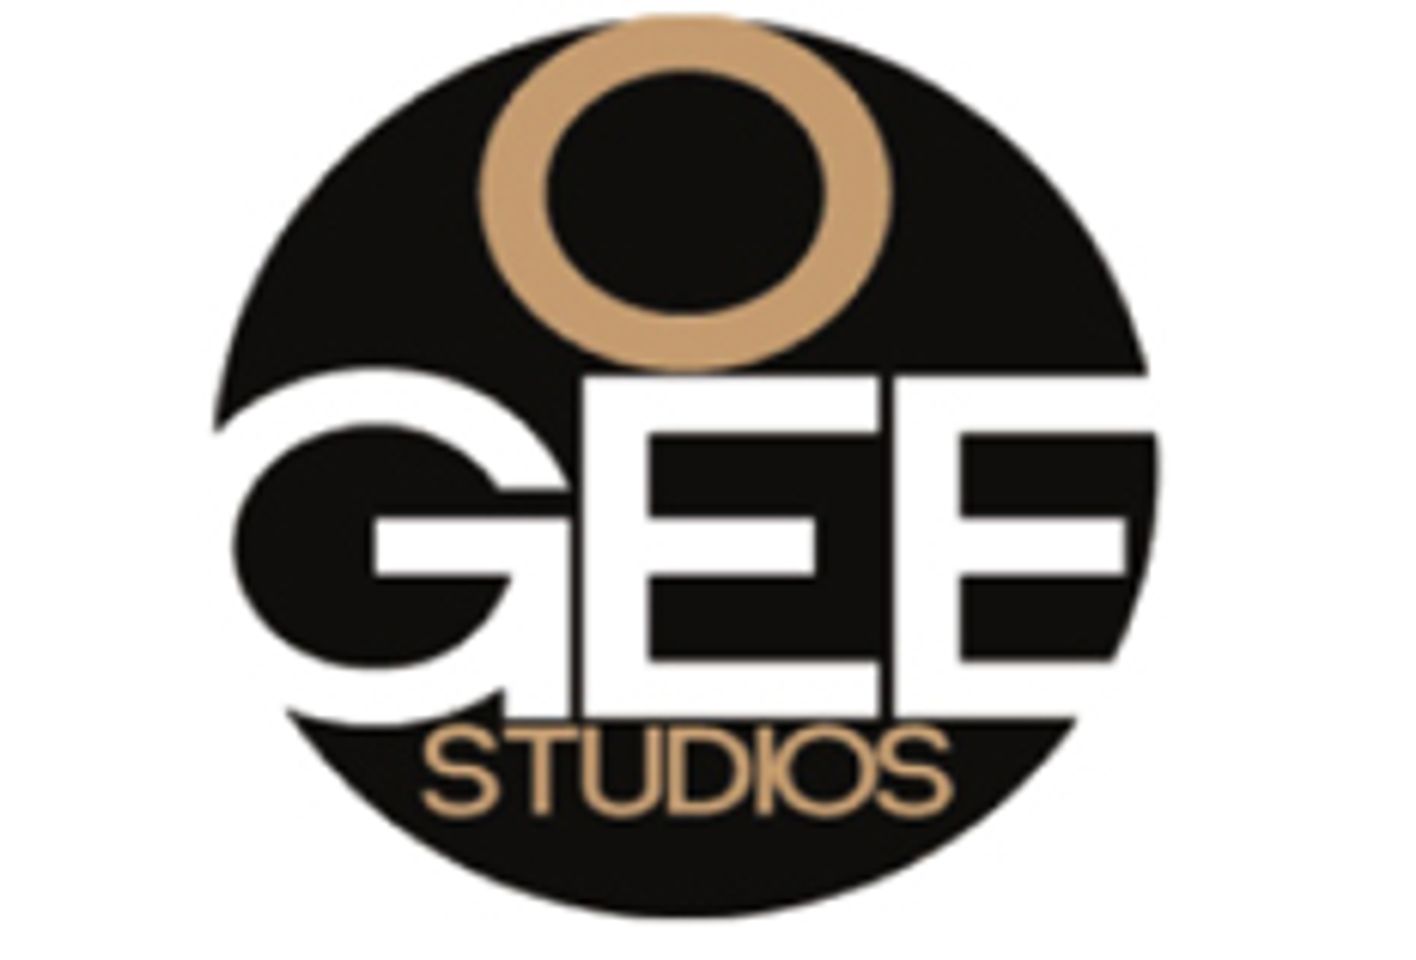 OGEE Studios Nabs Four NightMoves Nominations